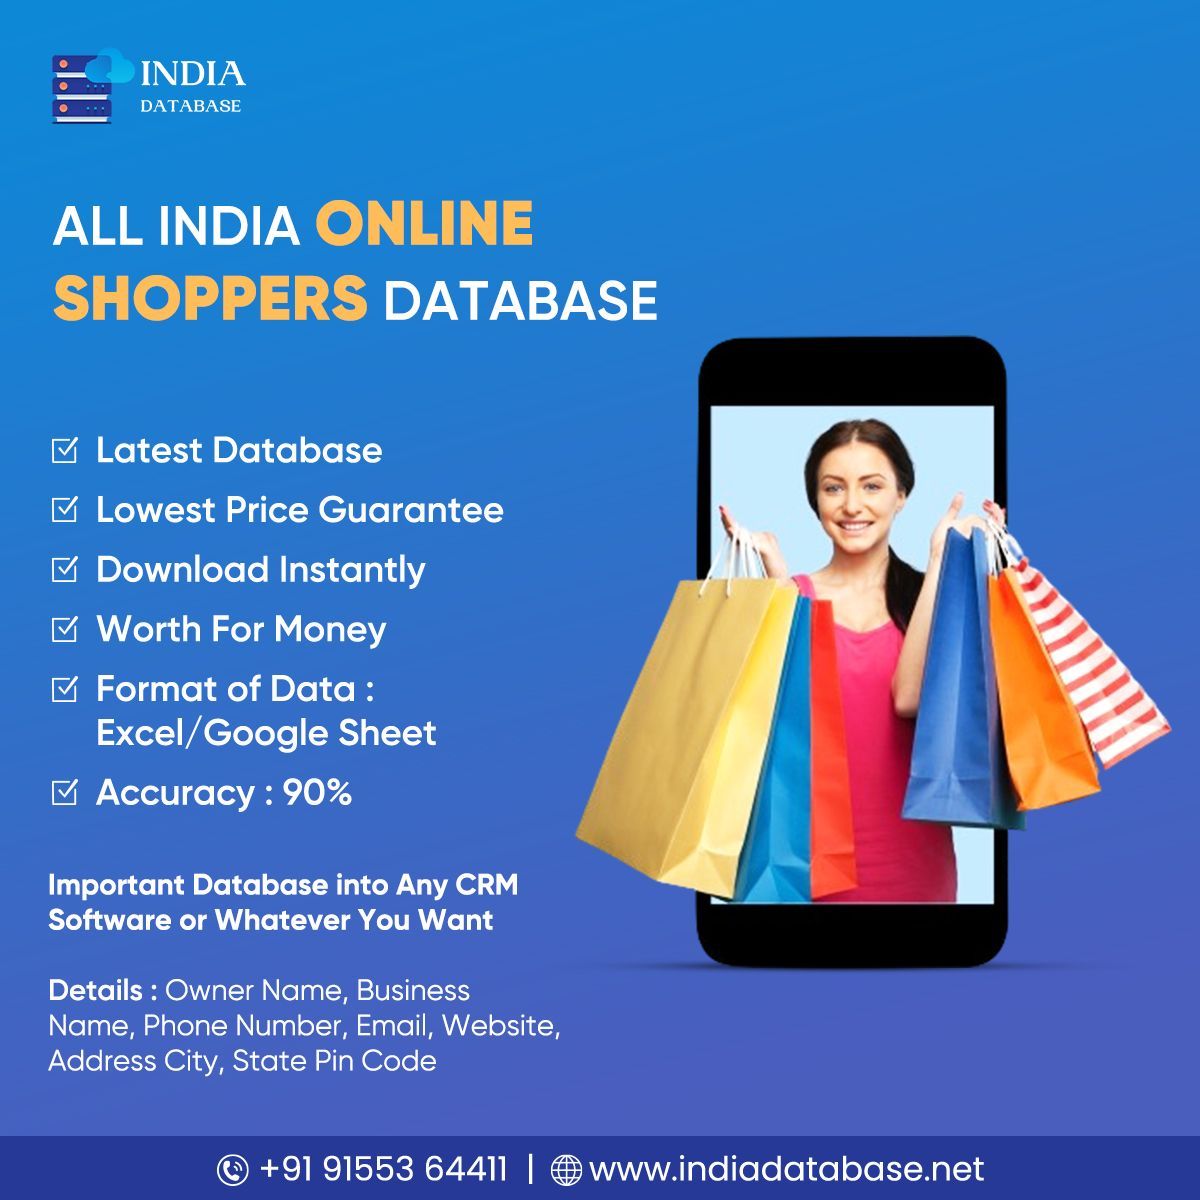 All India Online Shoppers Database